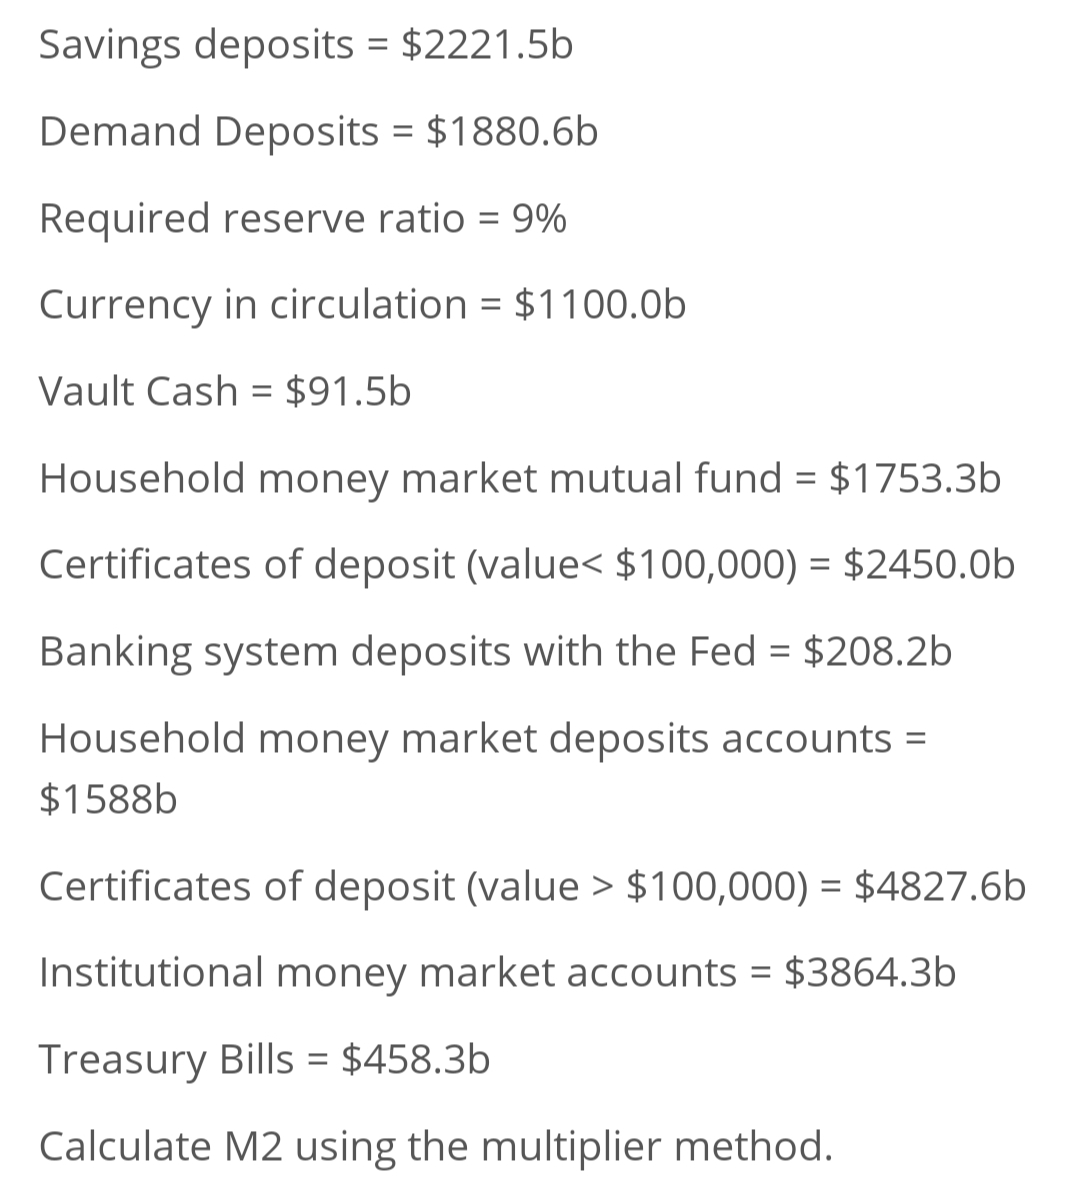 Savings deposits = $2221.5b
Demand Deposits = $1880.6b
Required reserve ratio = 9%
Currency in circulation = $1100.0b
Vault Cash = $91.5b
Household money market mutual fund = $1753.3b
Certificates of deposit (value< $100,000) = $2450.0b
Banking system deposits with the Fed = $208.2b
Household money market deposits accounts =
$1588b
Certificates of deposit (value > $100,000) = $4827.6b
Institutional money market accounts = $3864.3b
Treasury Bills = $458.3b
Calculate M2 using the multiplier method.